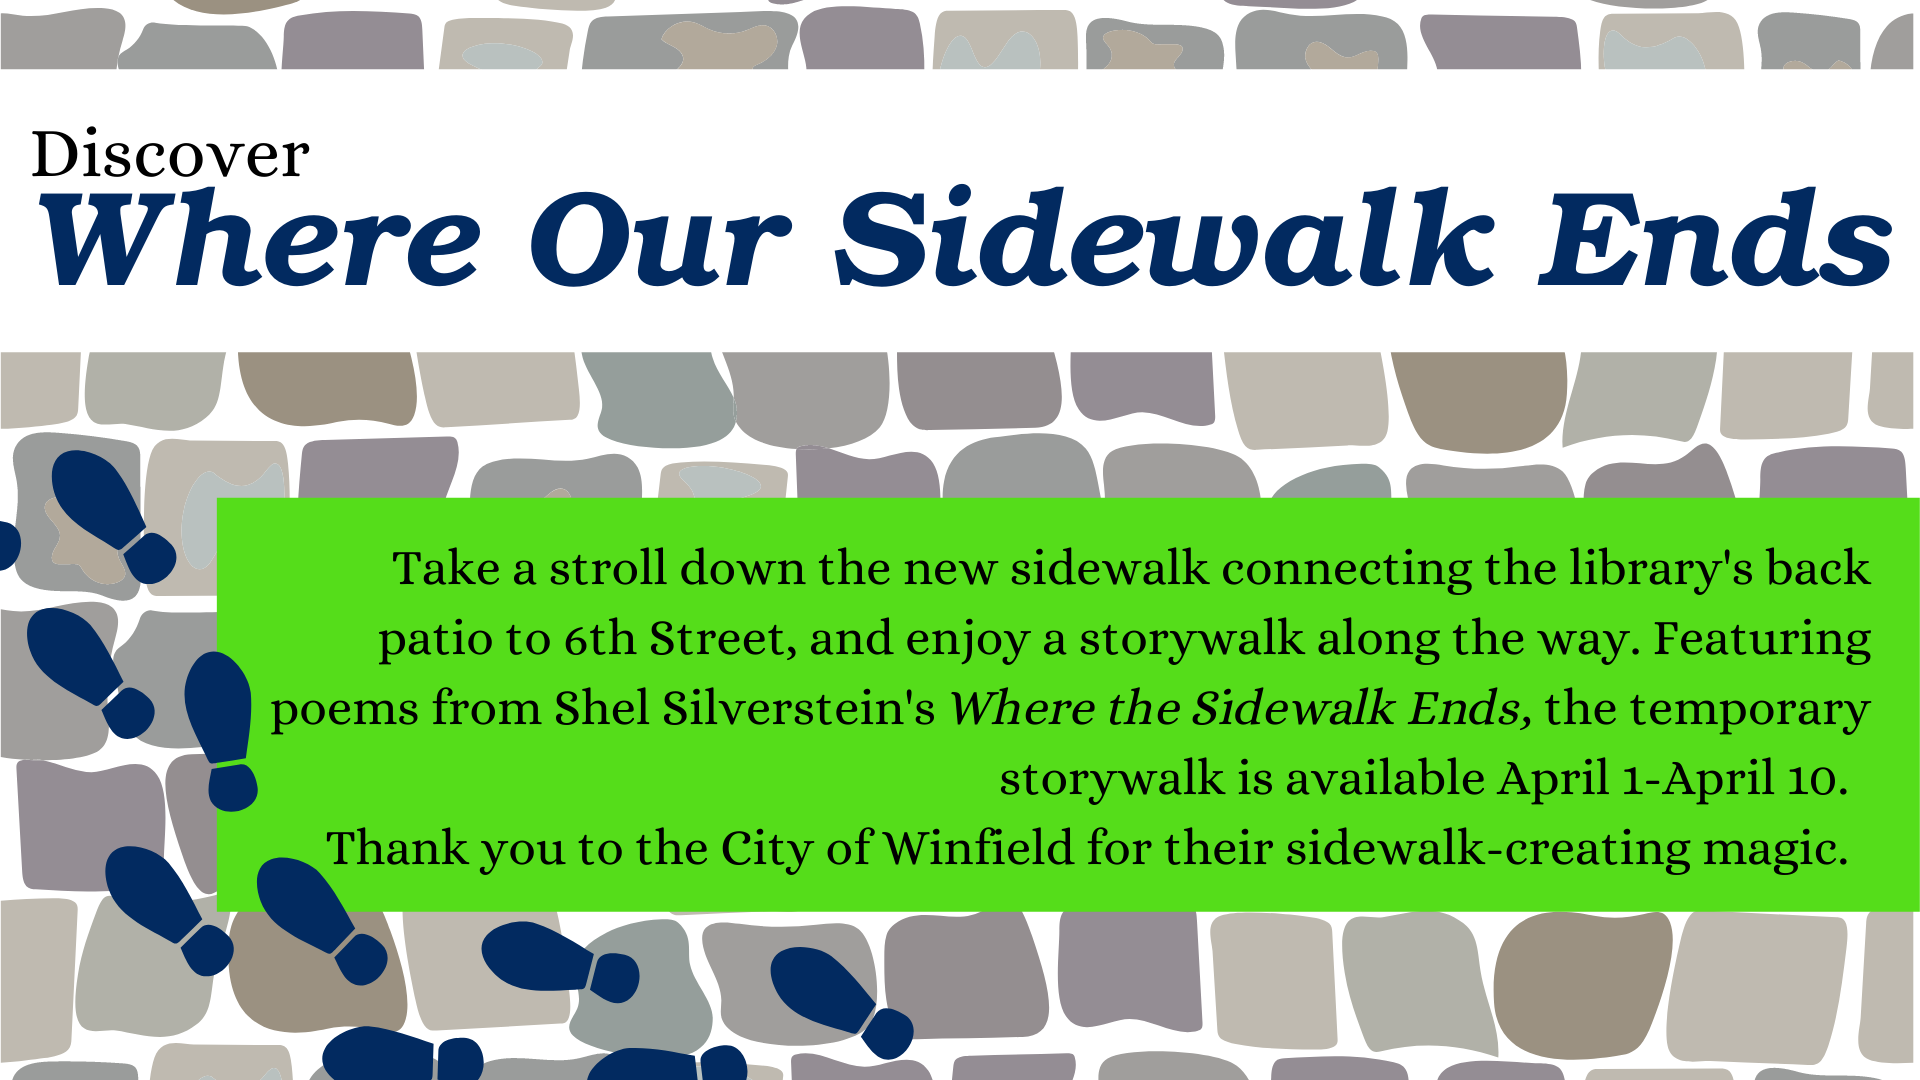 Discover Where Our Sidewalk Ends